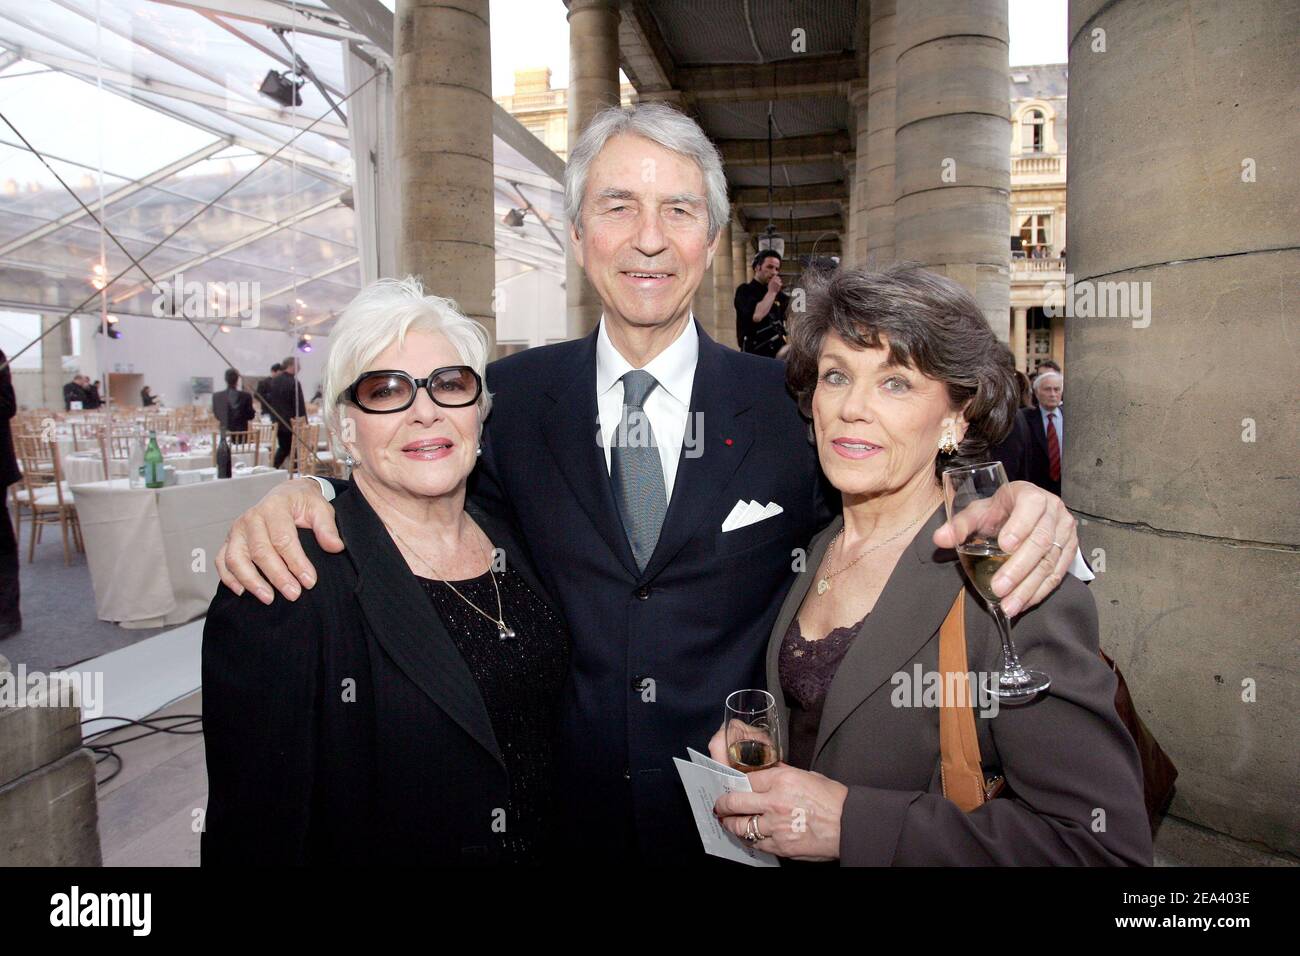 French actress Line Renaud (L) with French TV journalist Jean-Claude Narcy  and his wife Fabienne pose during the Night of European Culture held in the  Palais Royal courtyard in Paris, France, on